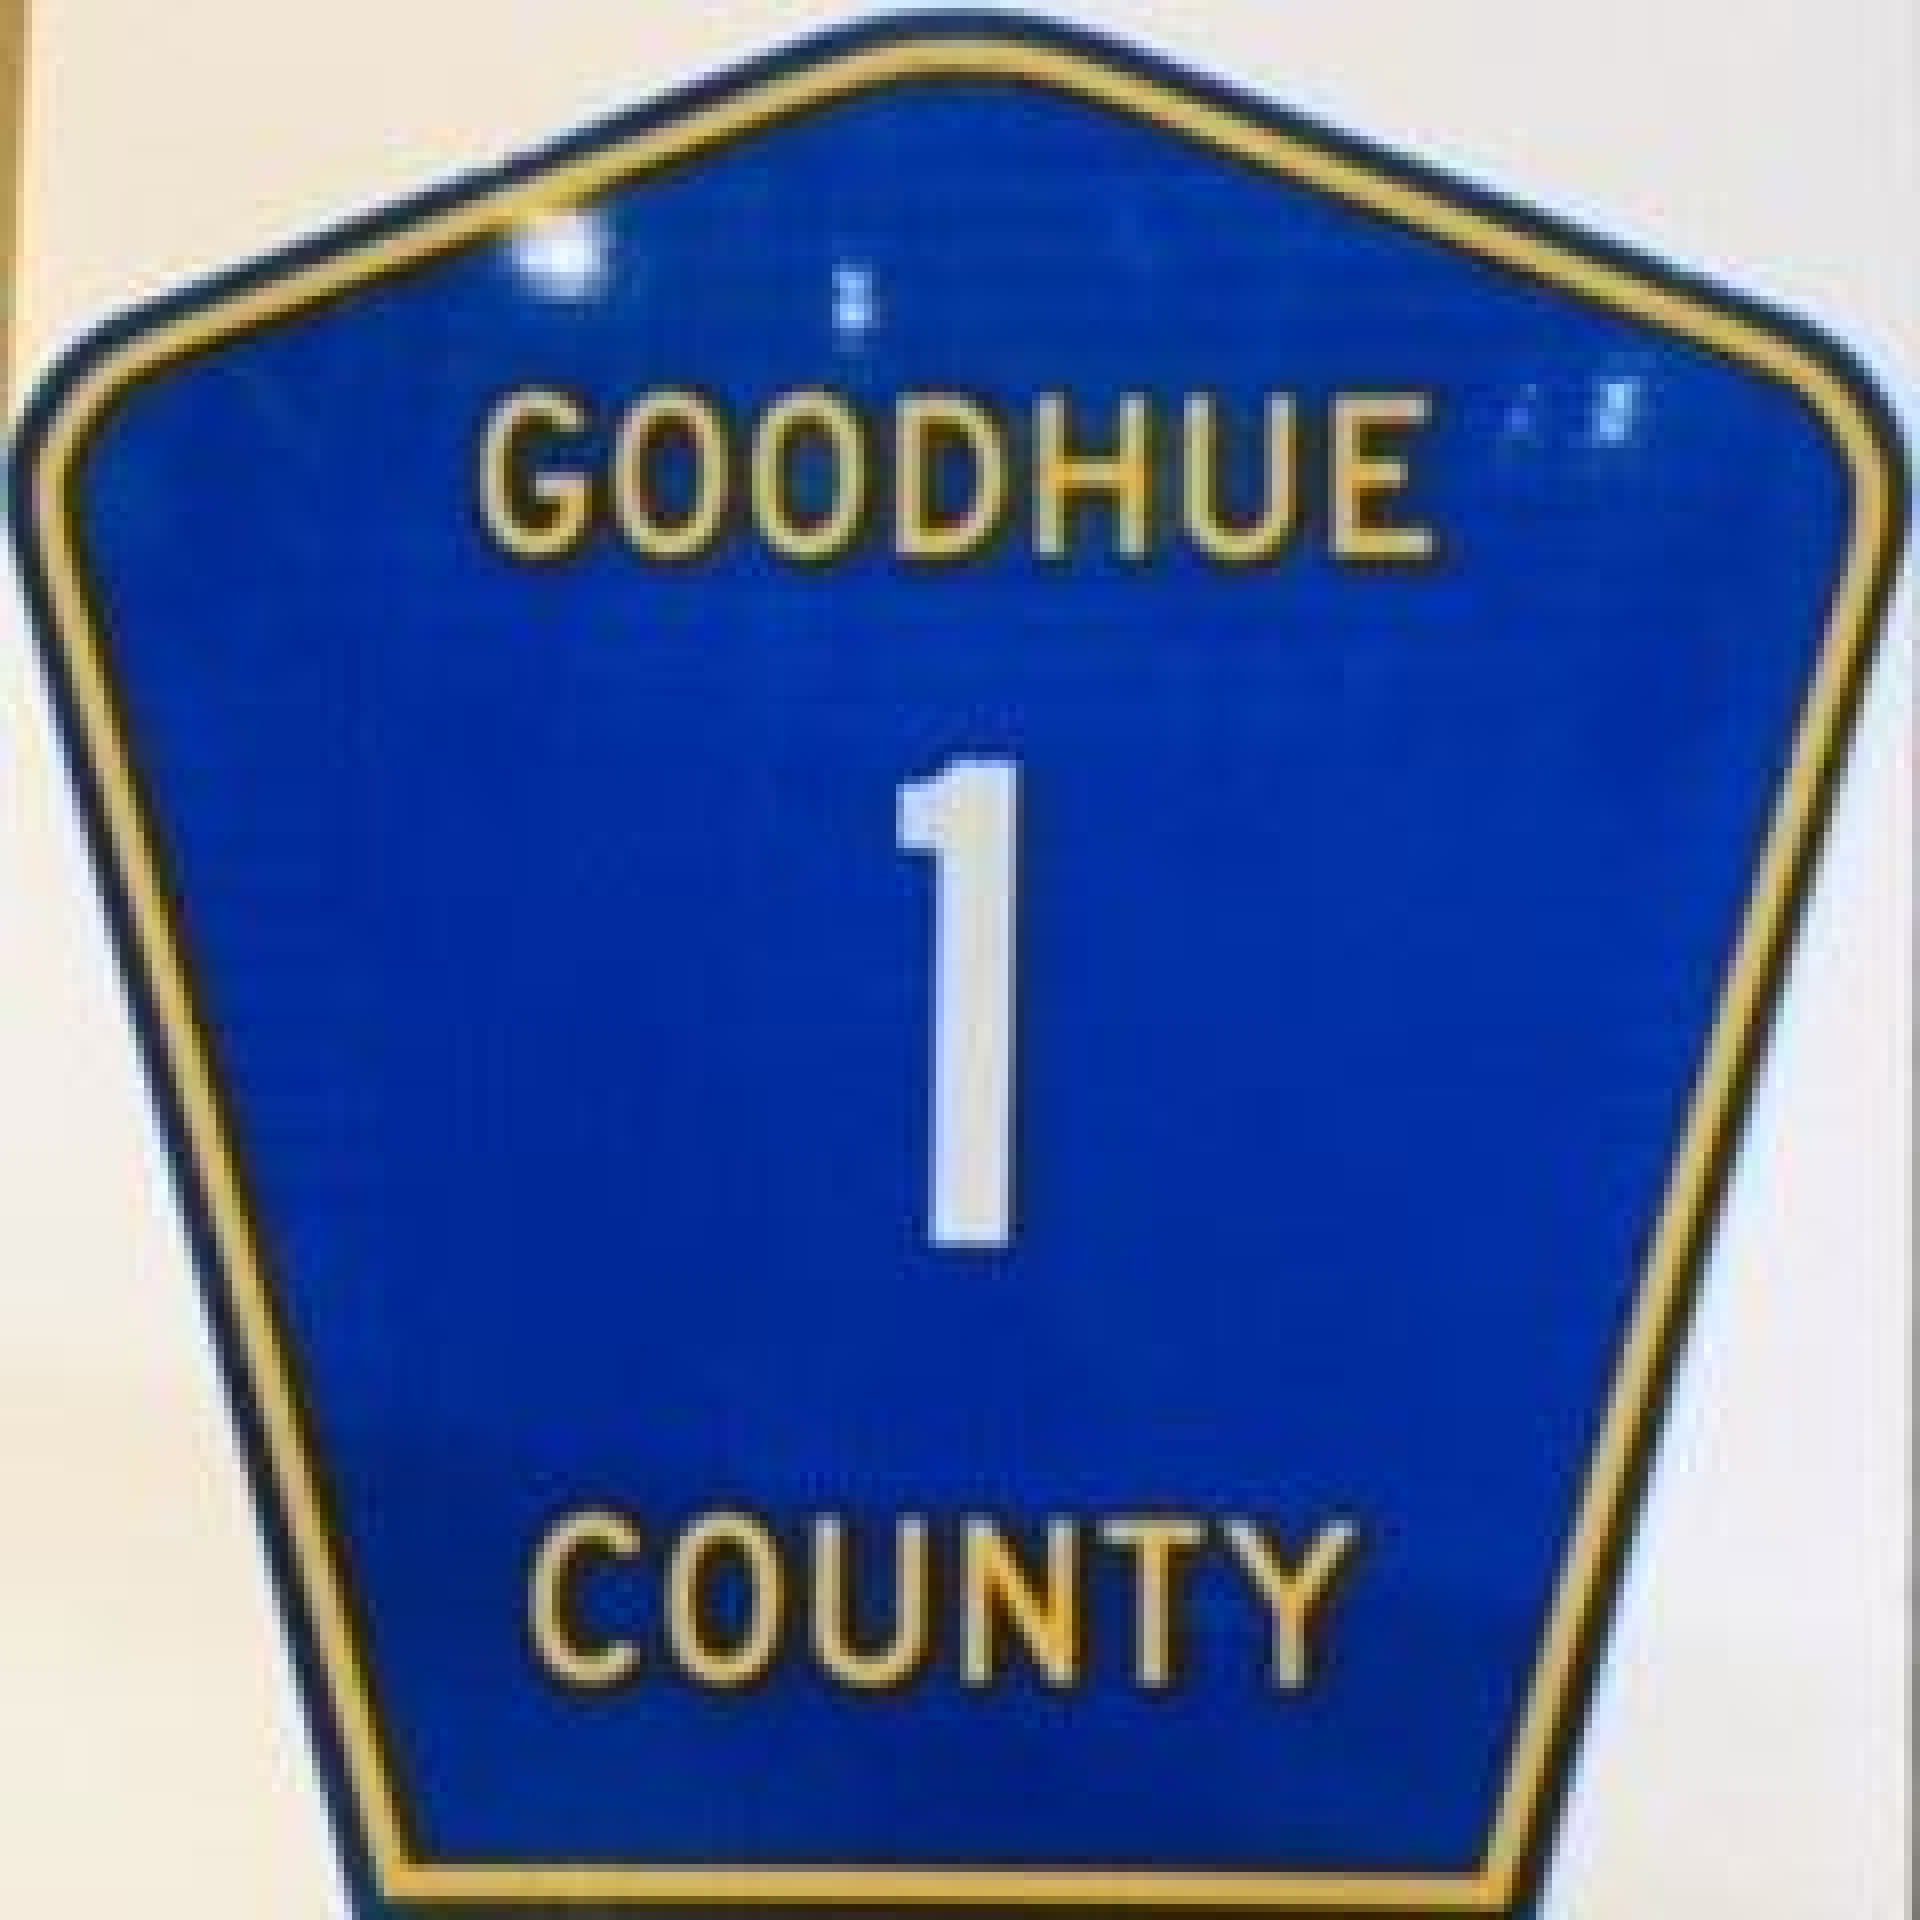 County state aid highway and county road sign example.